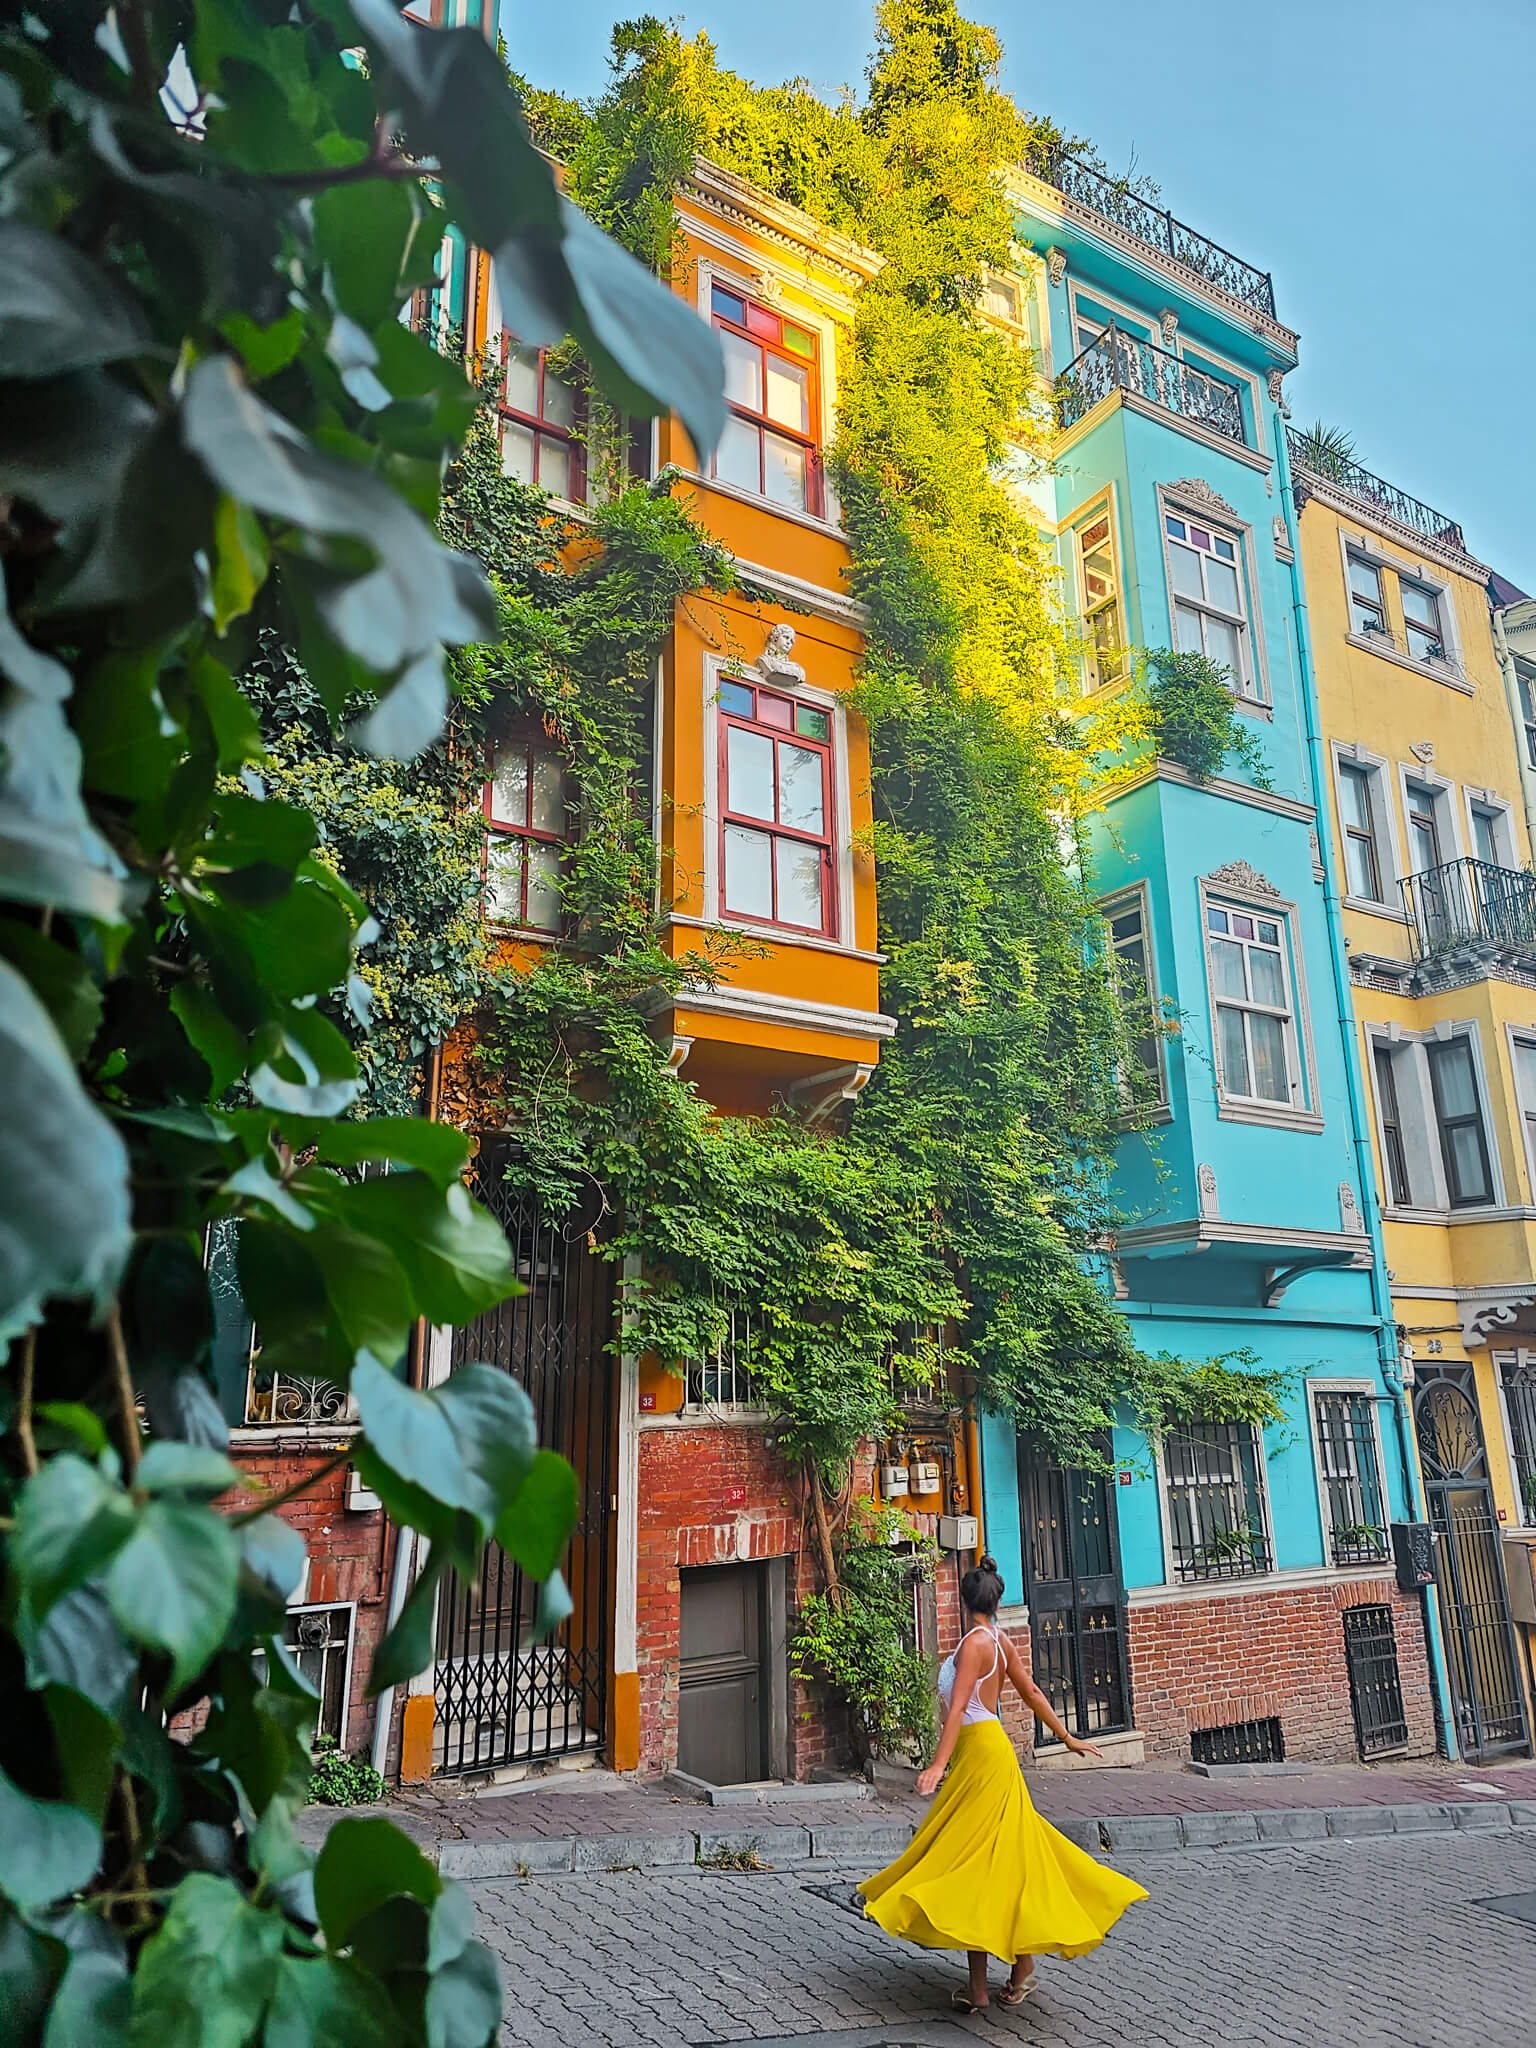 Balat, things to see when you travel to Istanbul, Turkey